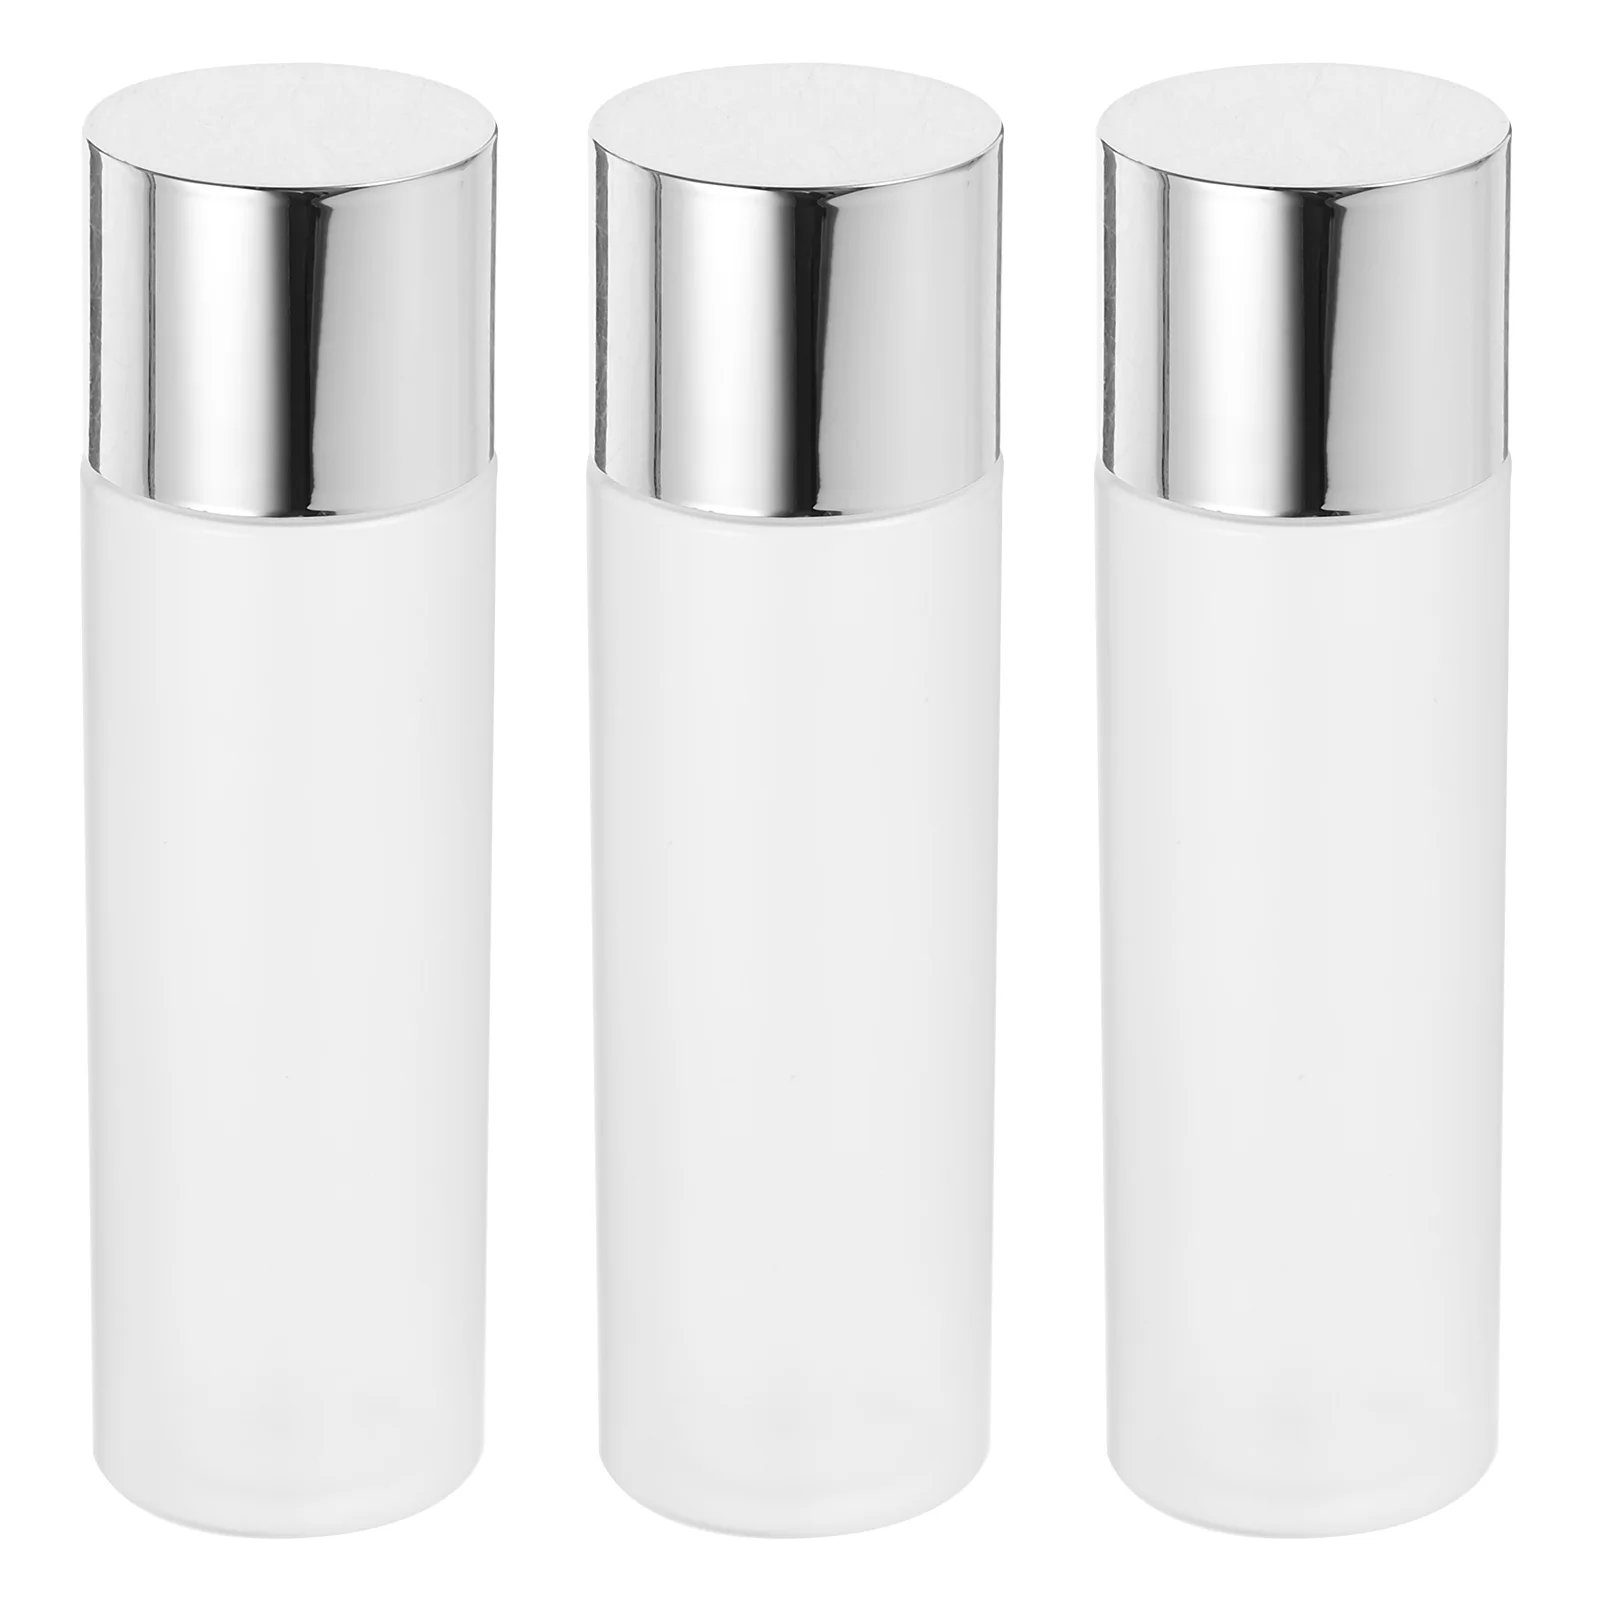 

3 Pcs Bottle Sub for Emulsion Sample Travel Makeup Frosted Lotion Empty Refillable